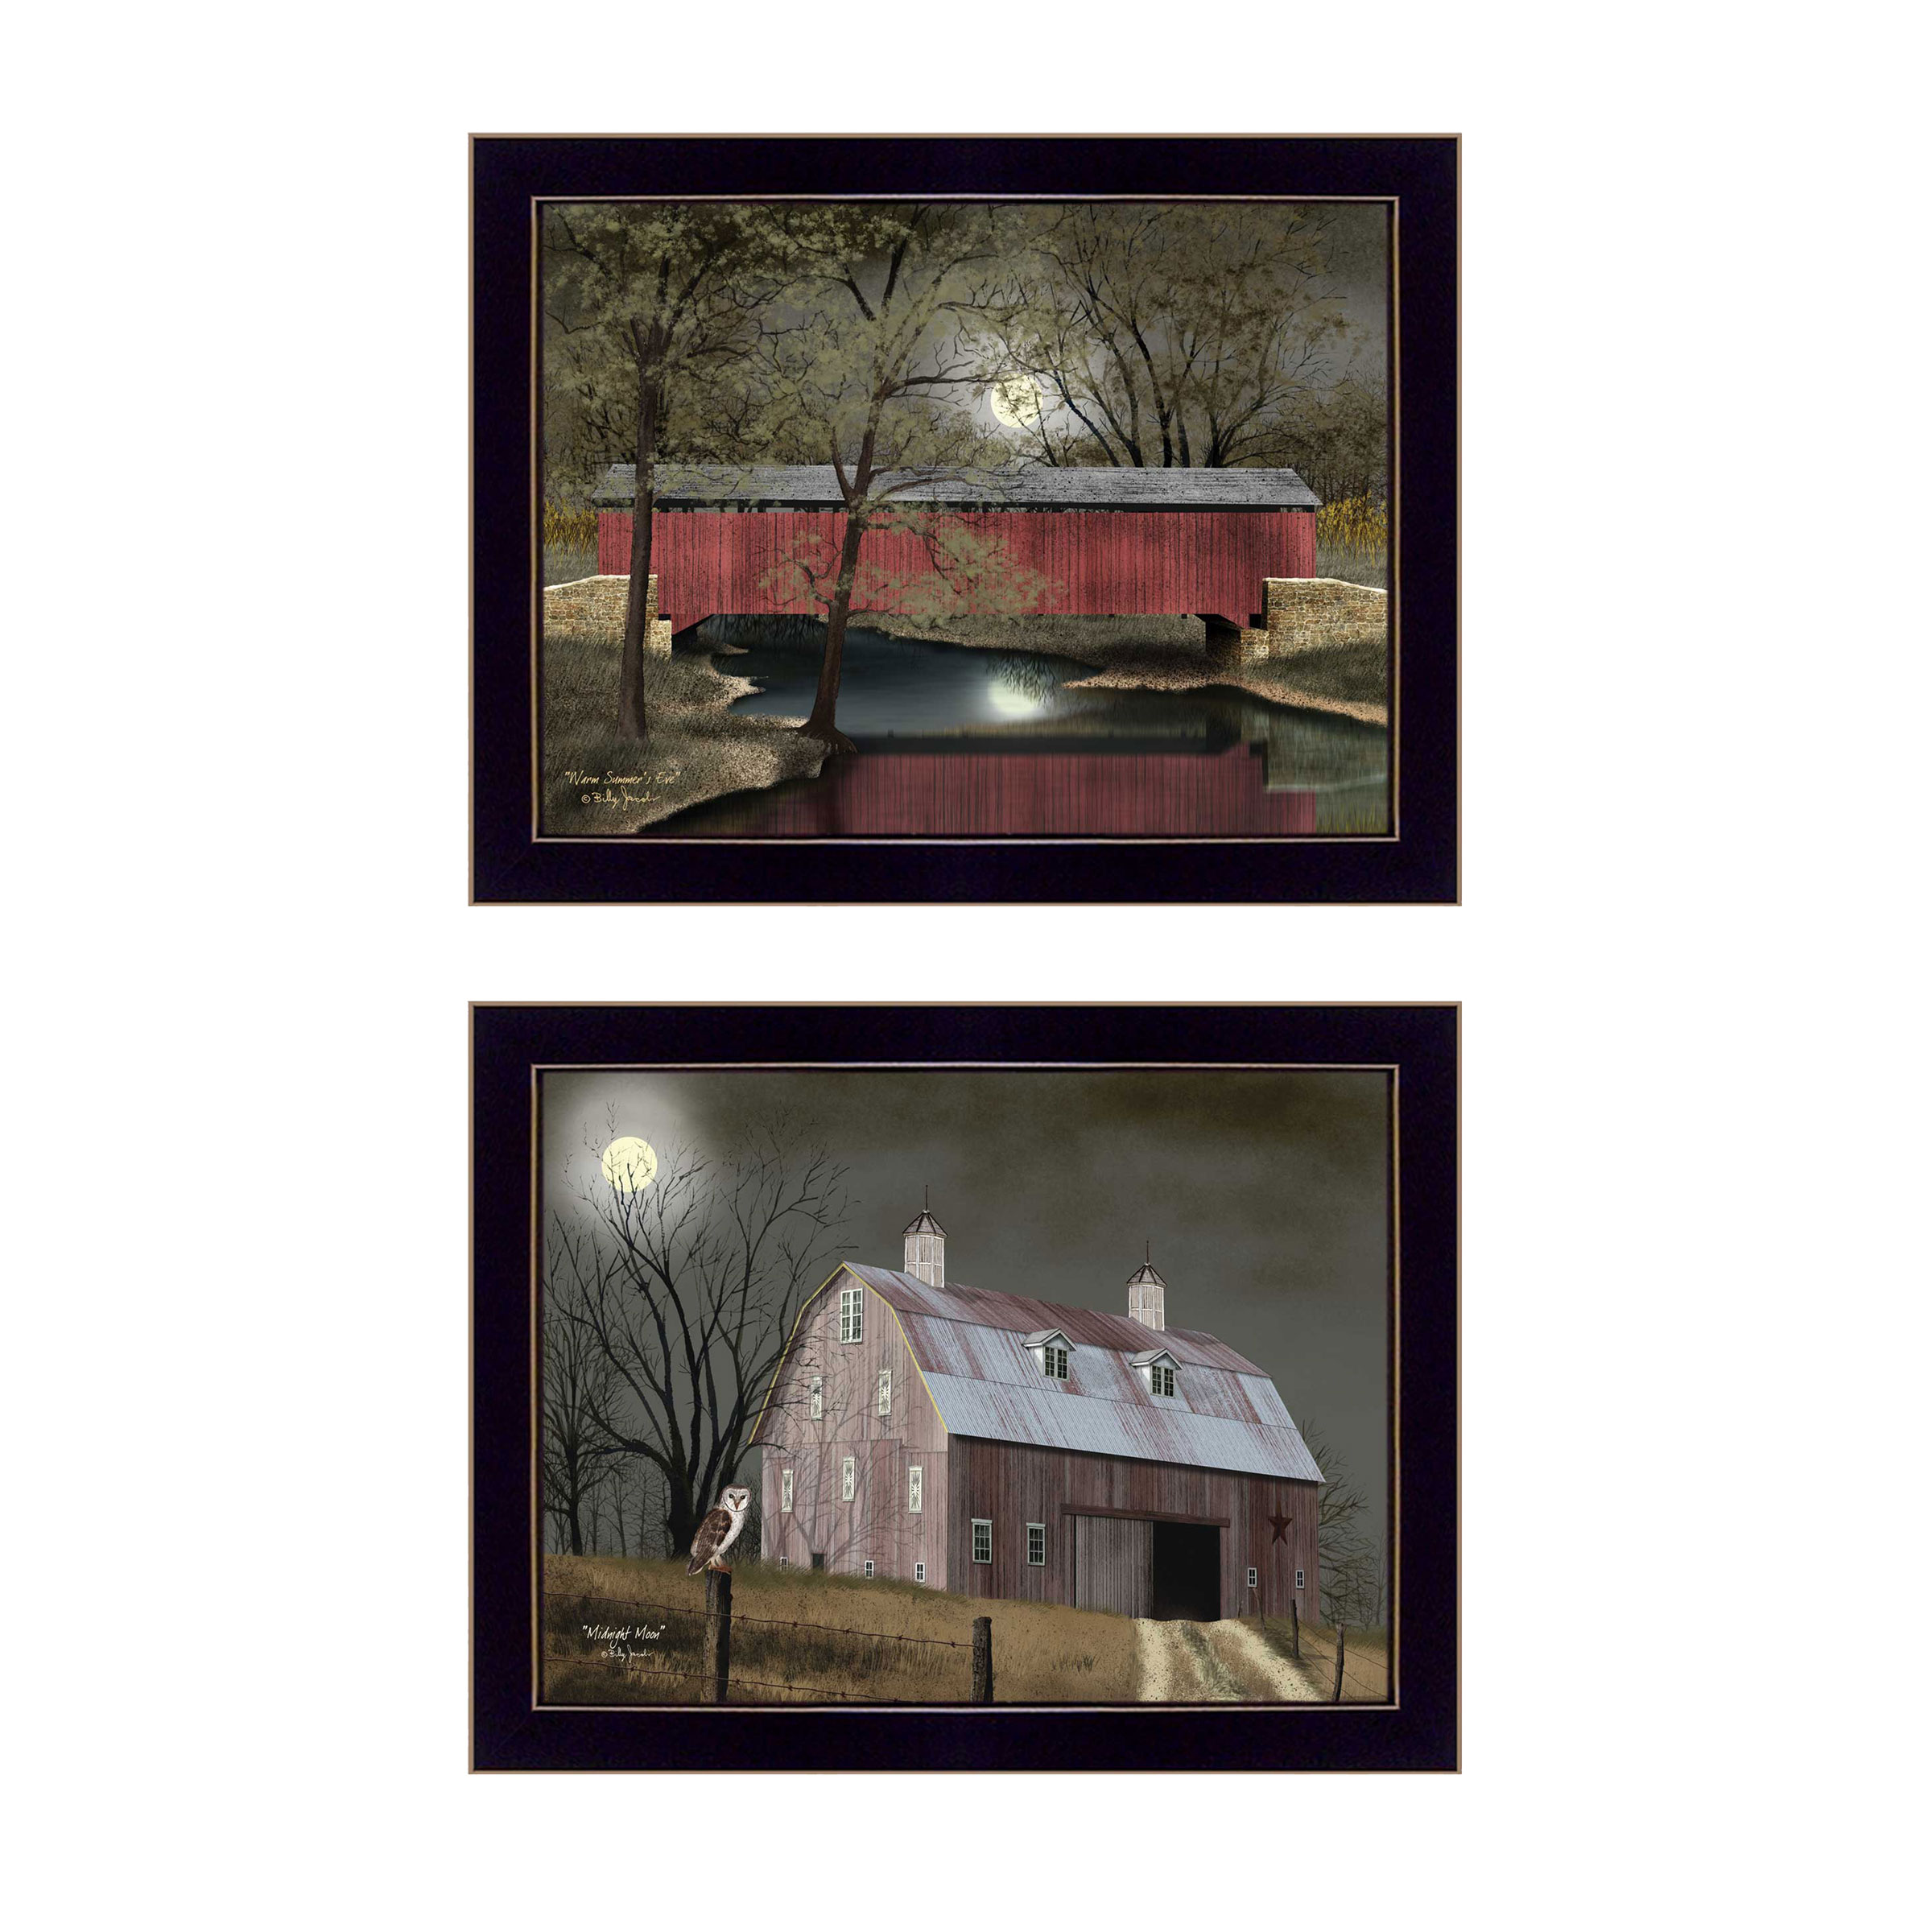 "Midnight Moon Collection" 2-Piece Vignette By Billy Jacobs, Printed Wall Art, Ready To Hang Framed Poster, Black Frame